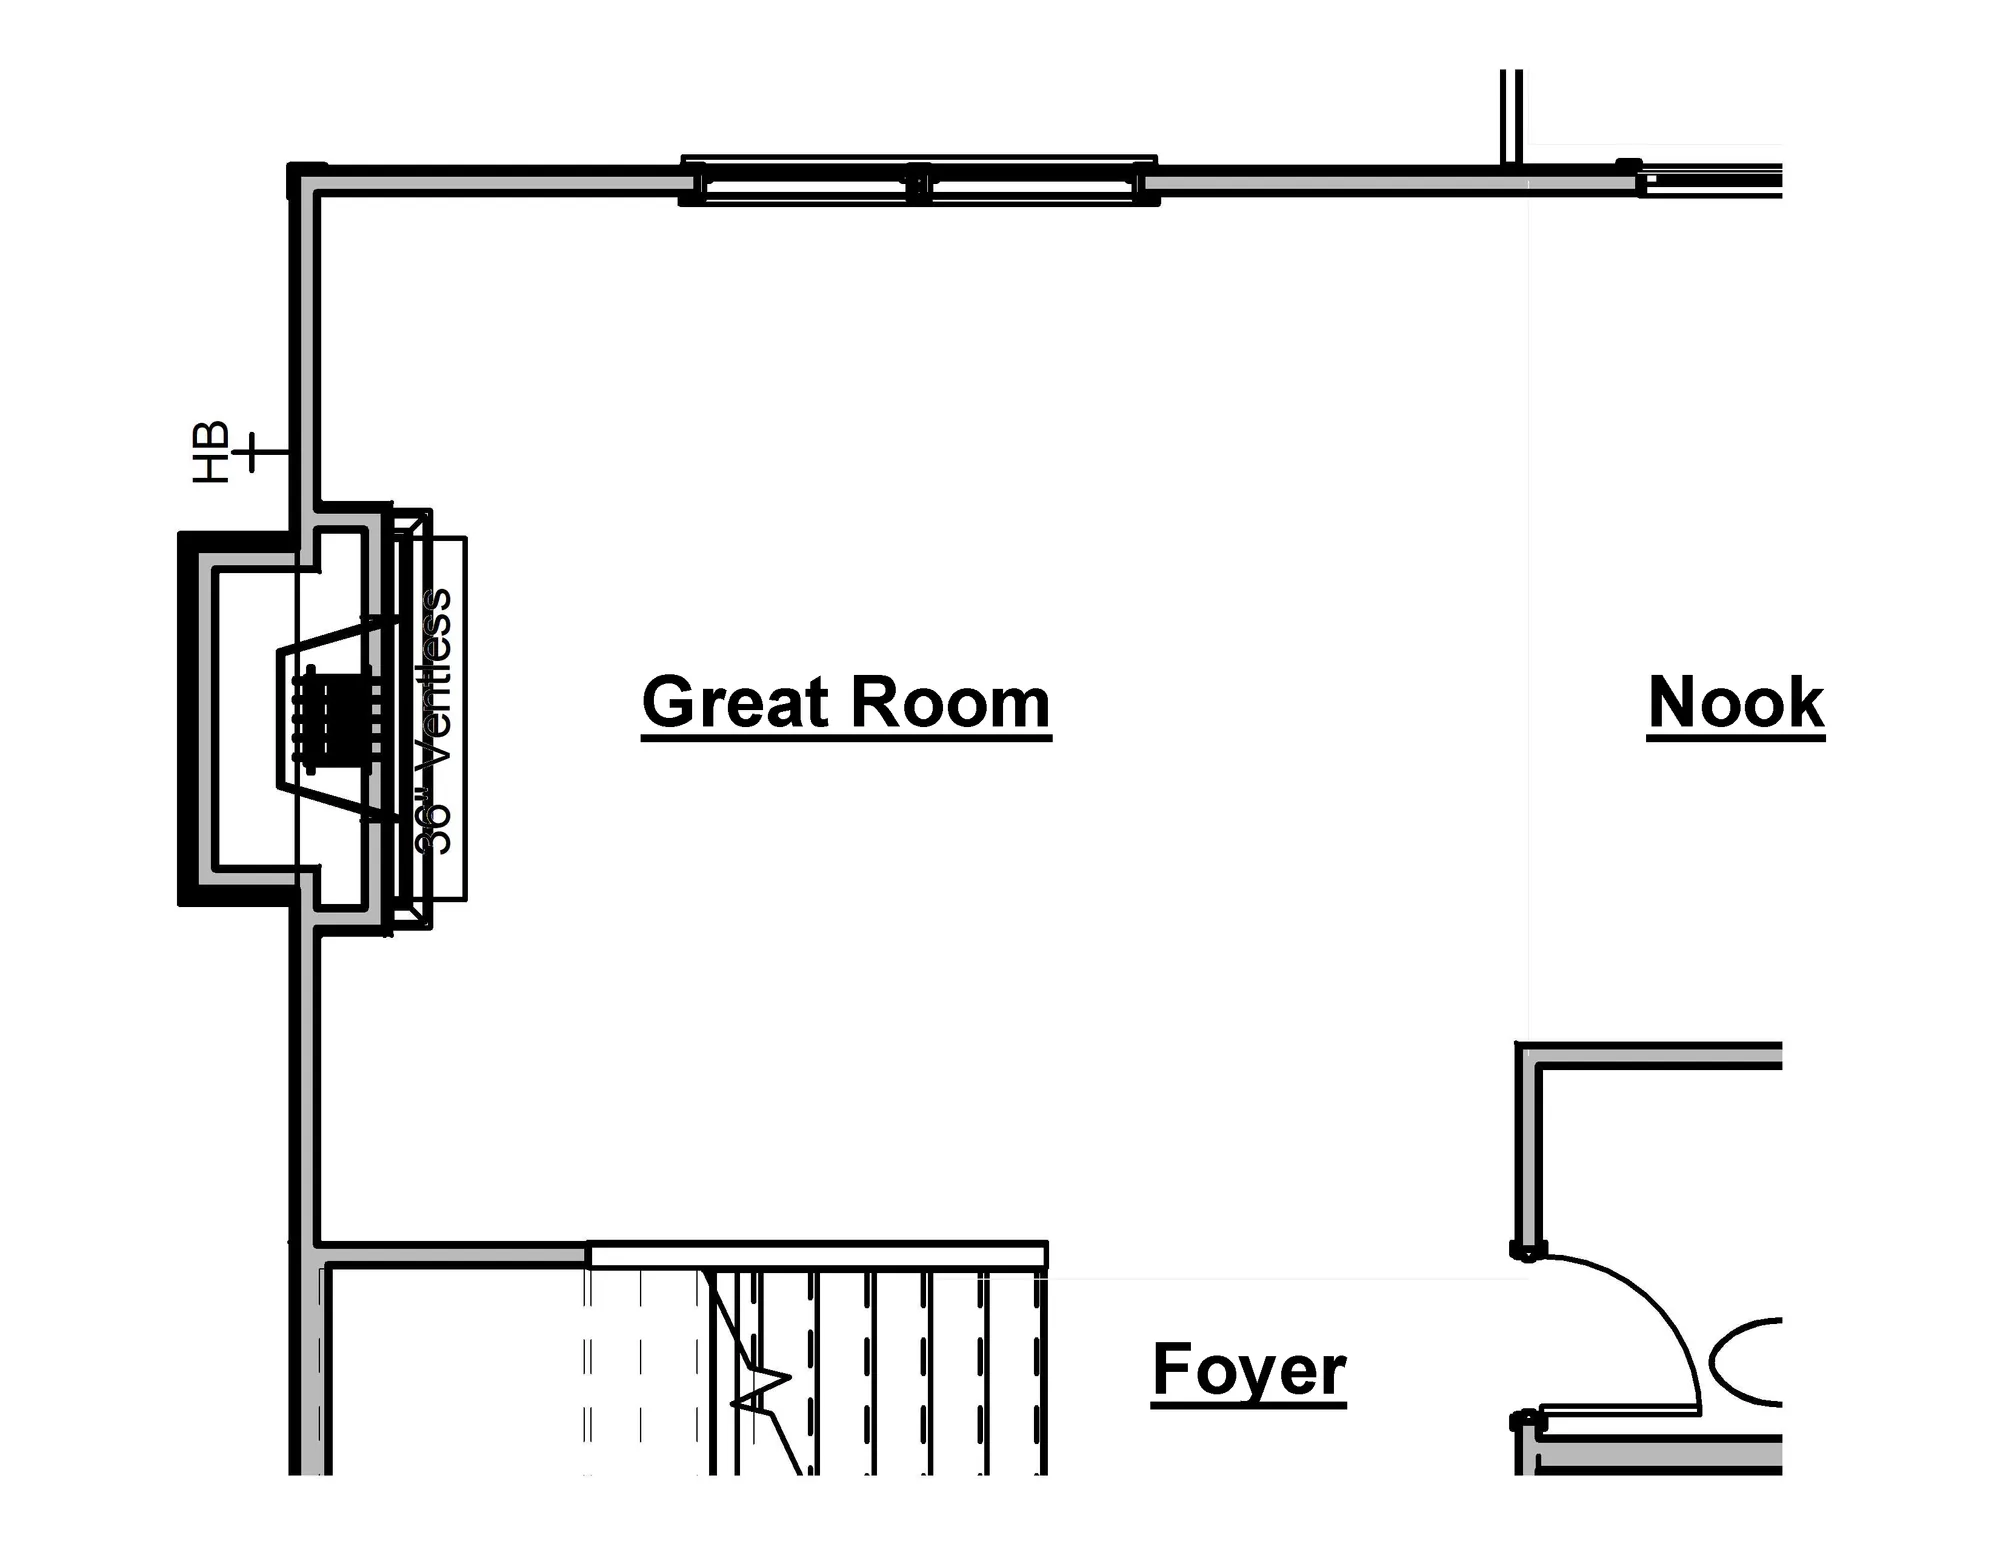 Great Room - Fireplace Bump Out Option - undefined